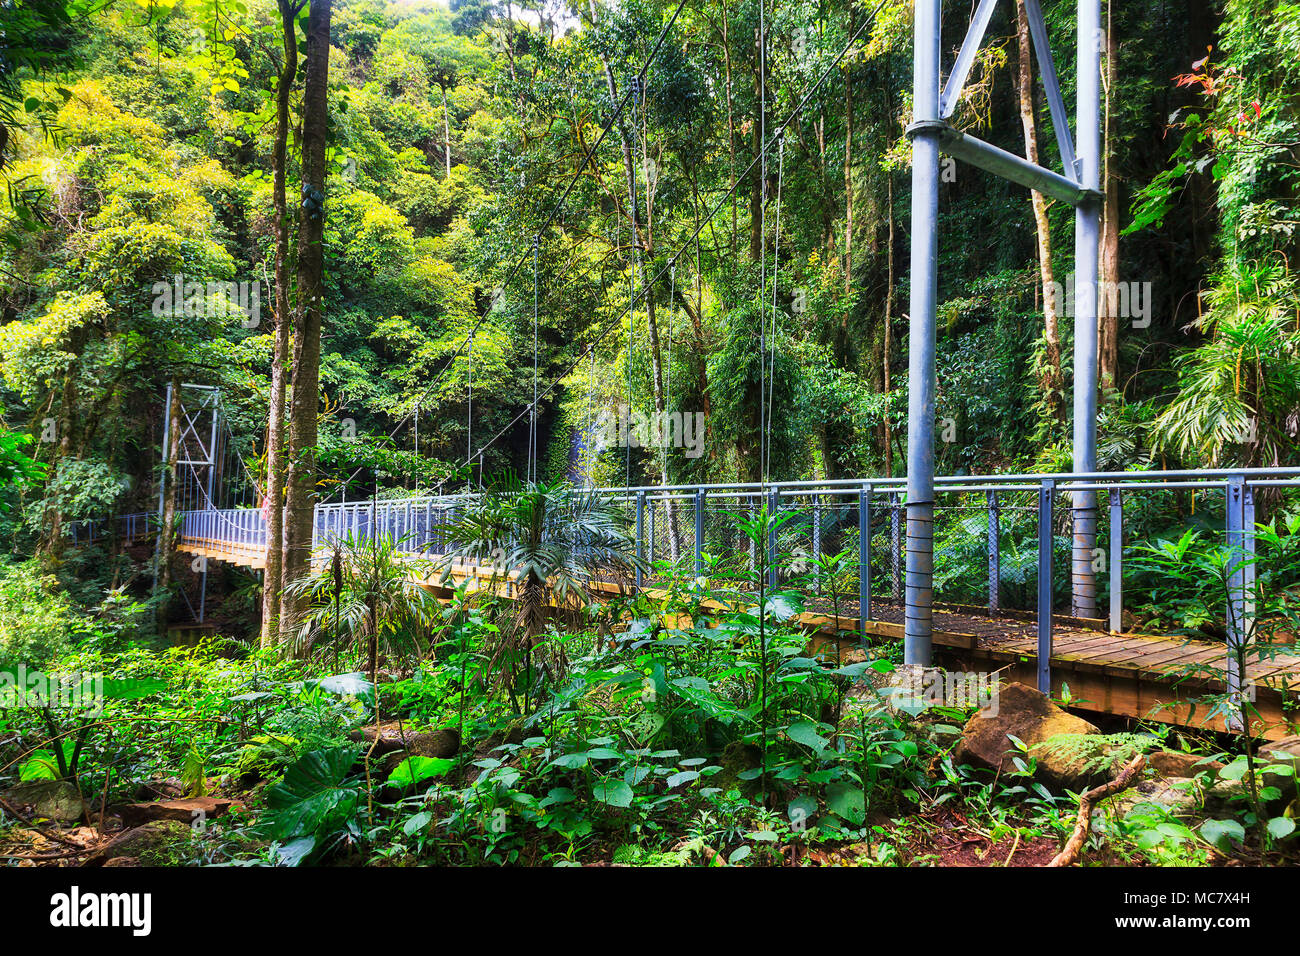 Footbridge over Crystal shower falls creek in Dorrigo national park. Remote wet temperate rainforest with lush evergreen canopy on a rainy day. Stock Photo